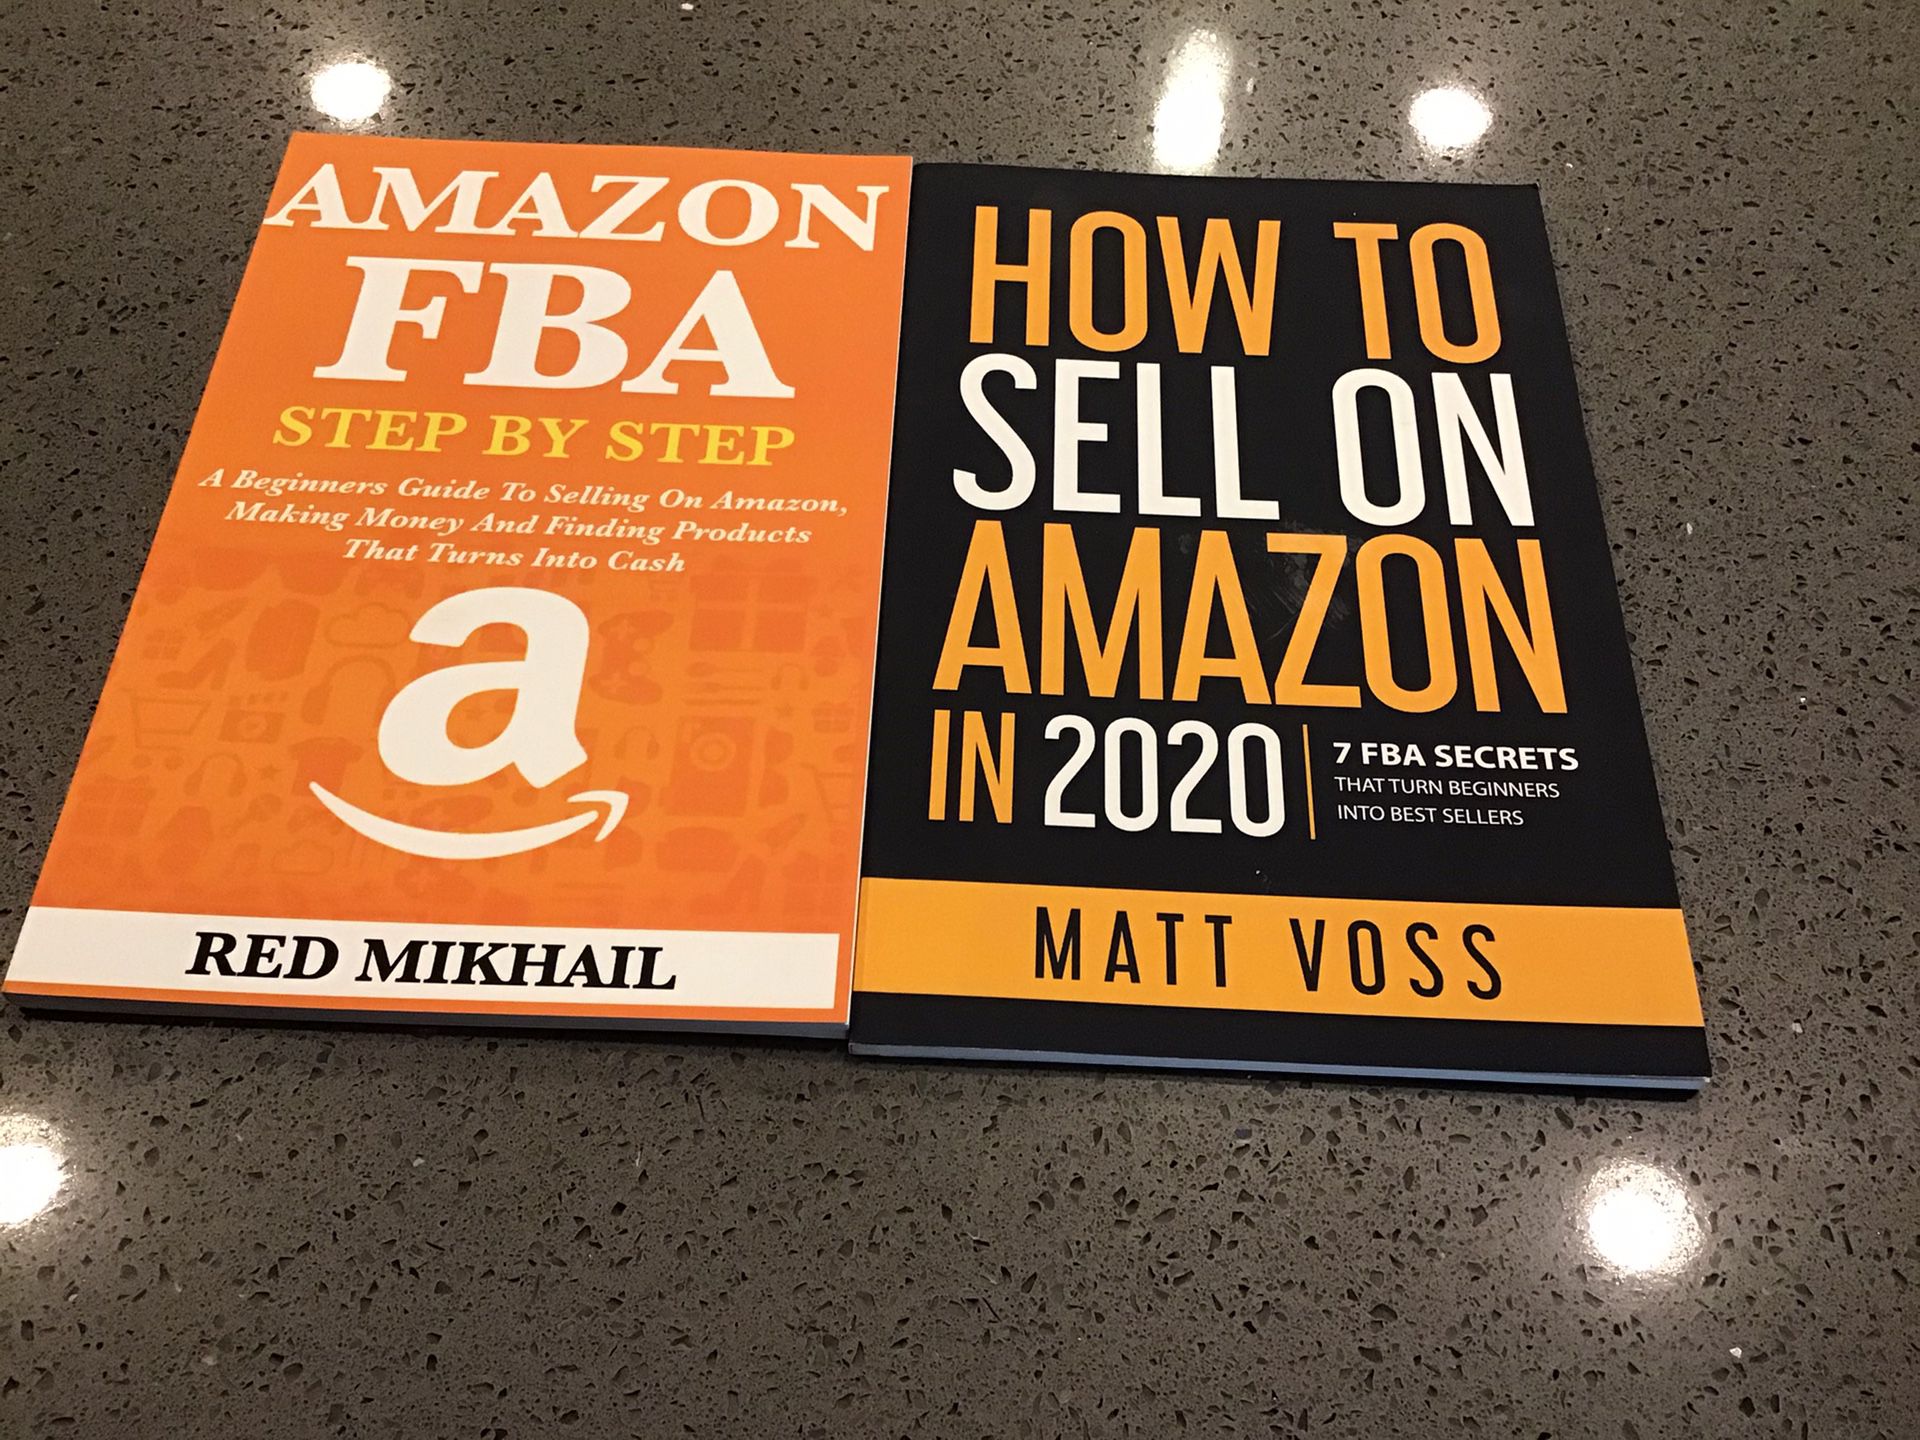 How to Sell on Amazon and FBA Step by Step paperback books